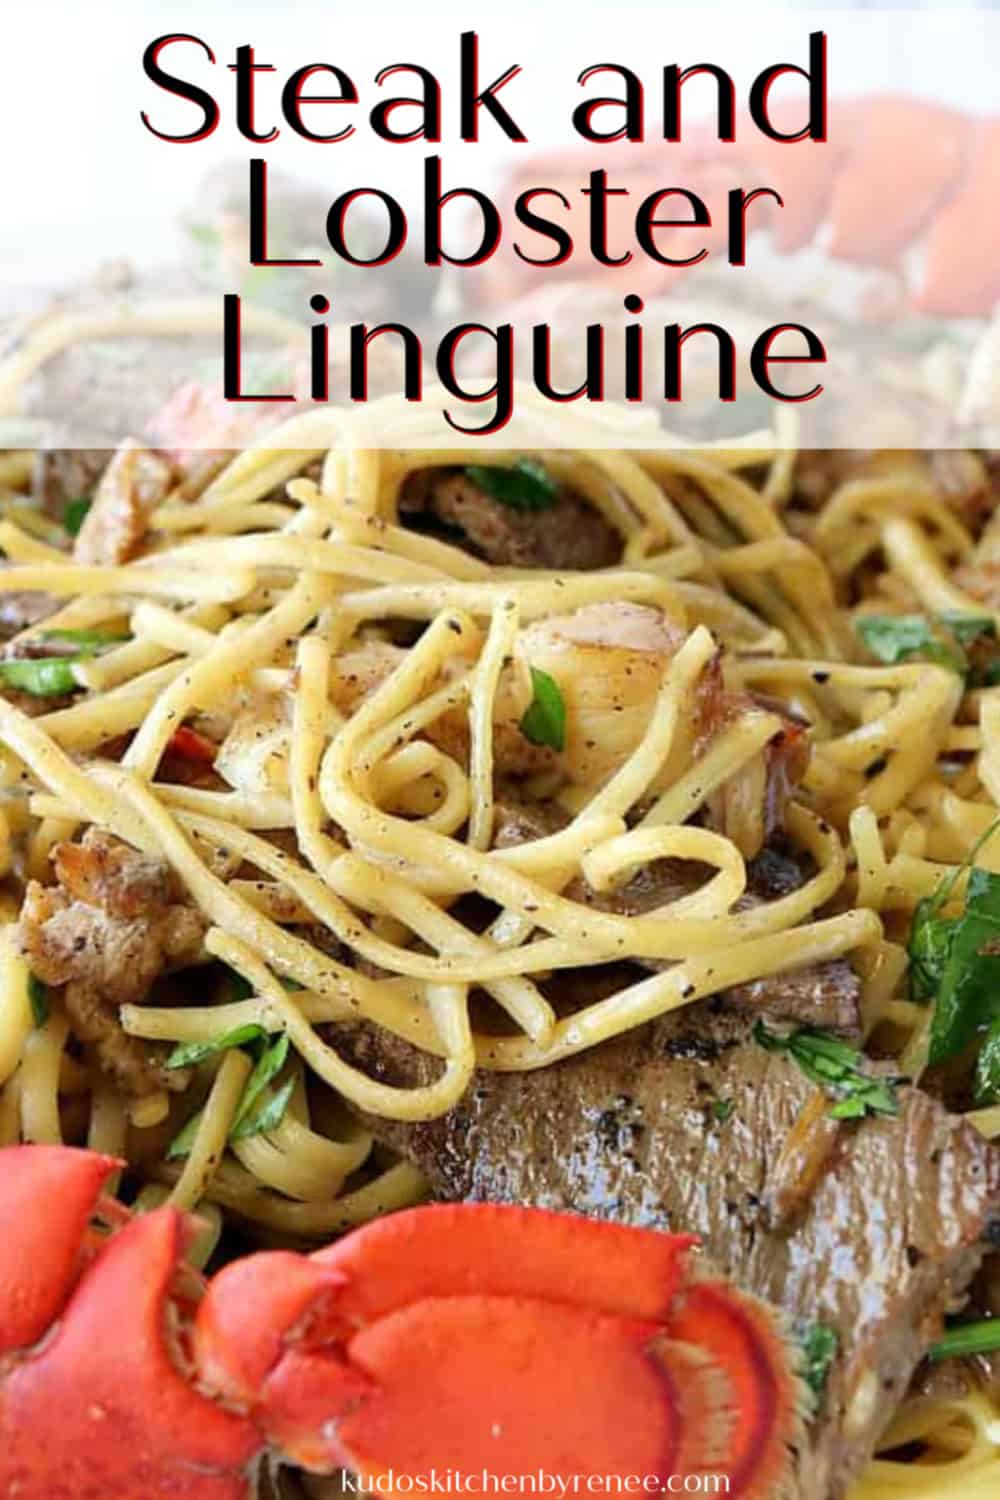 Steak and Lobster Linguine - Kudos Kitchen by Renee